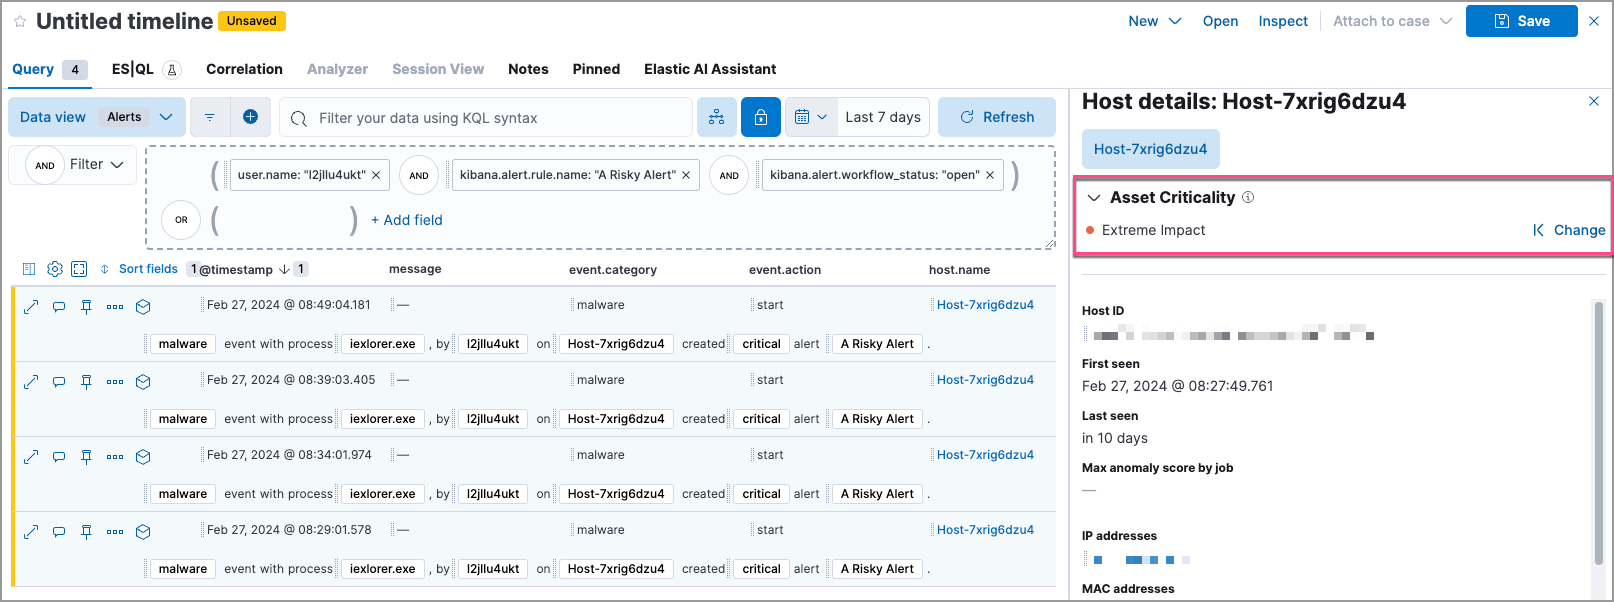 Assign asset criticality from the host details flyout in Timeline